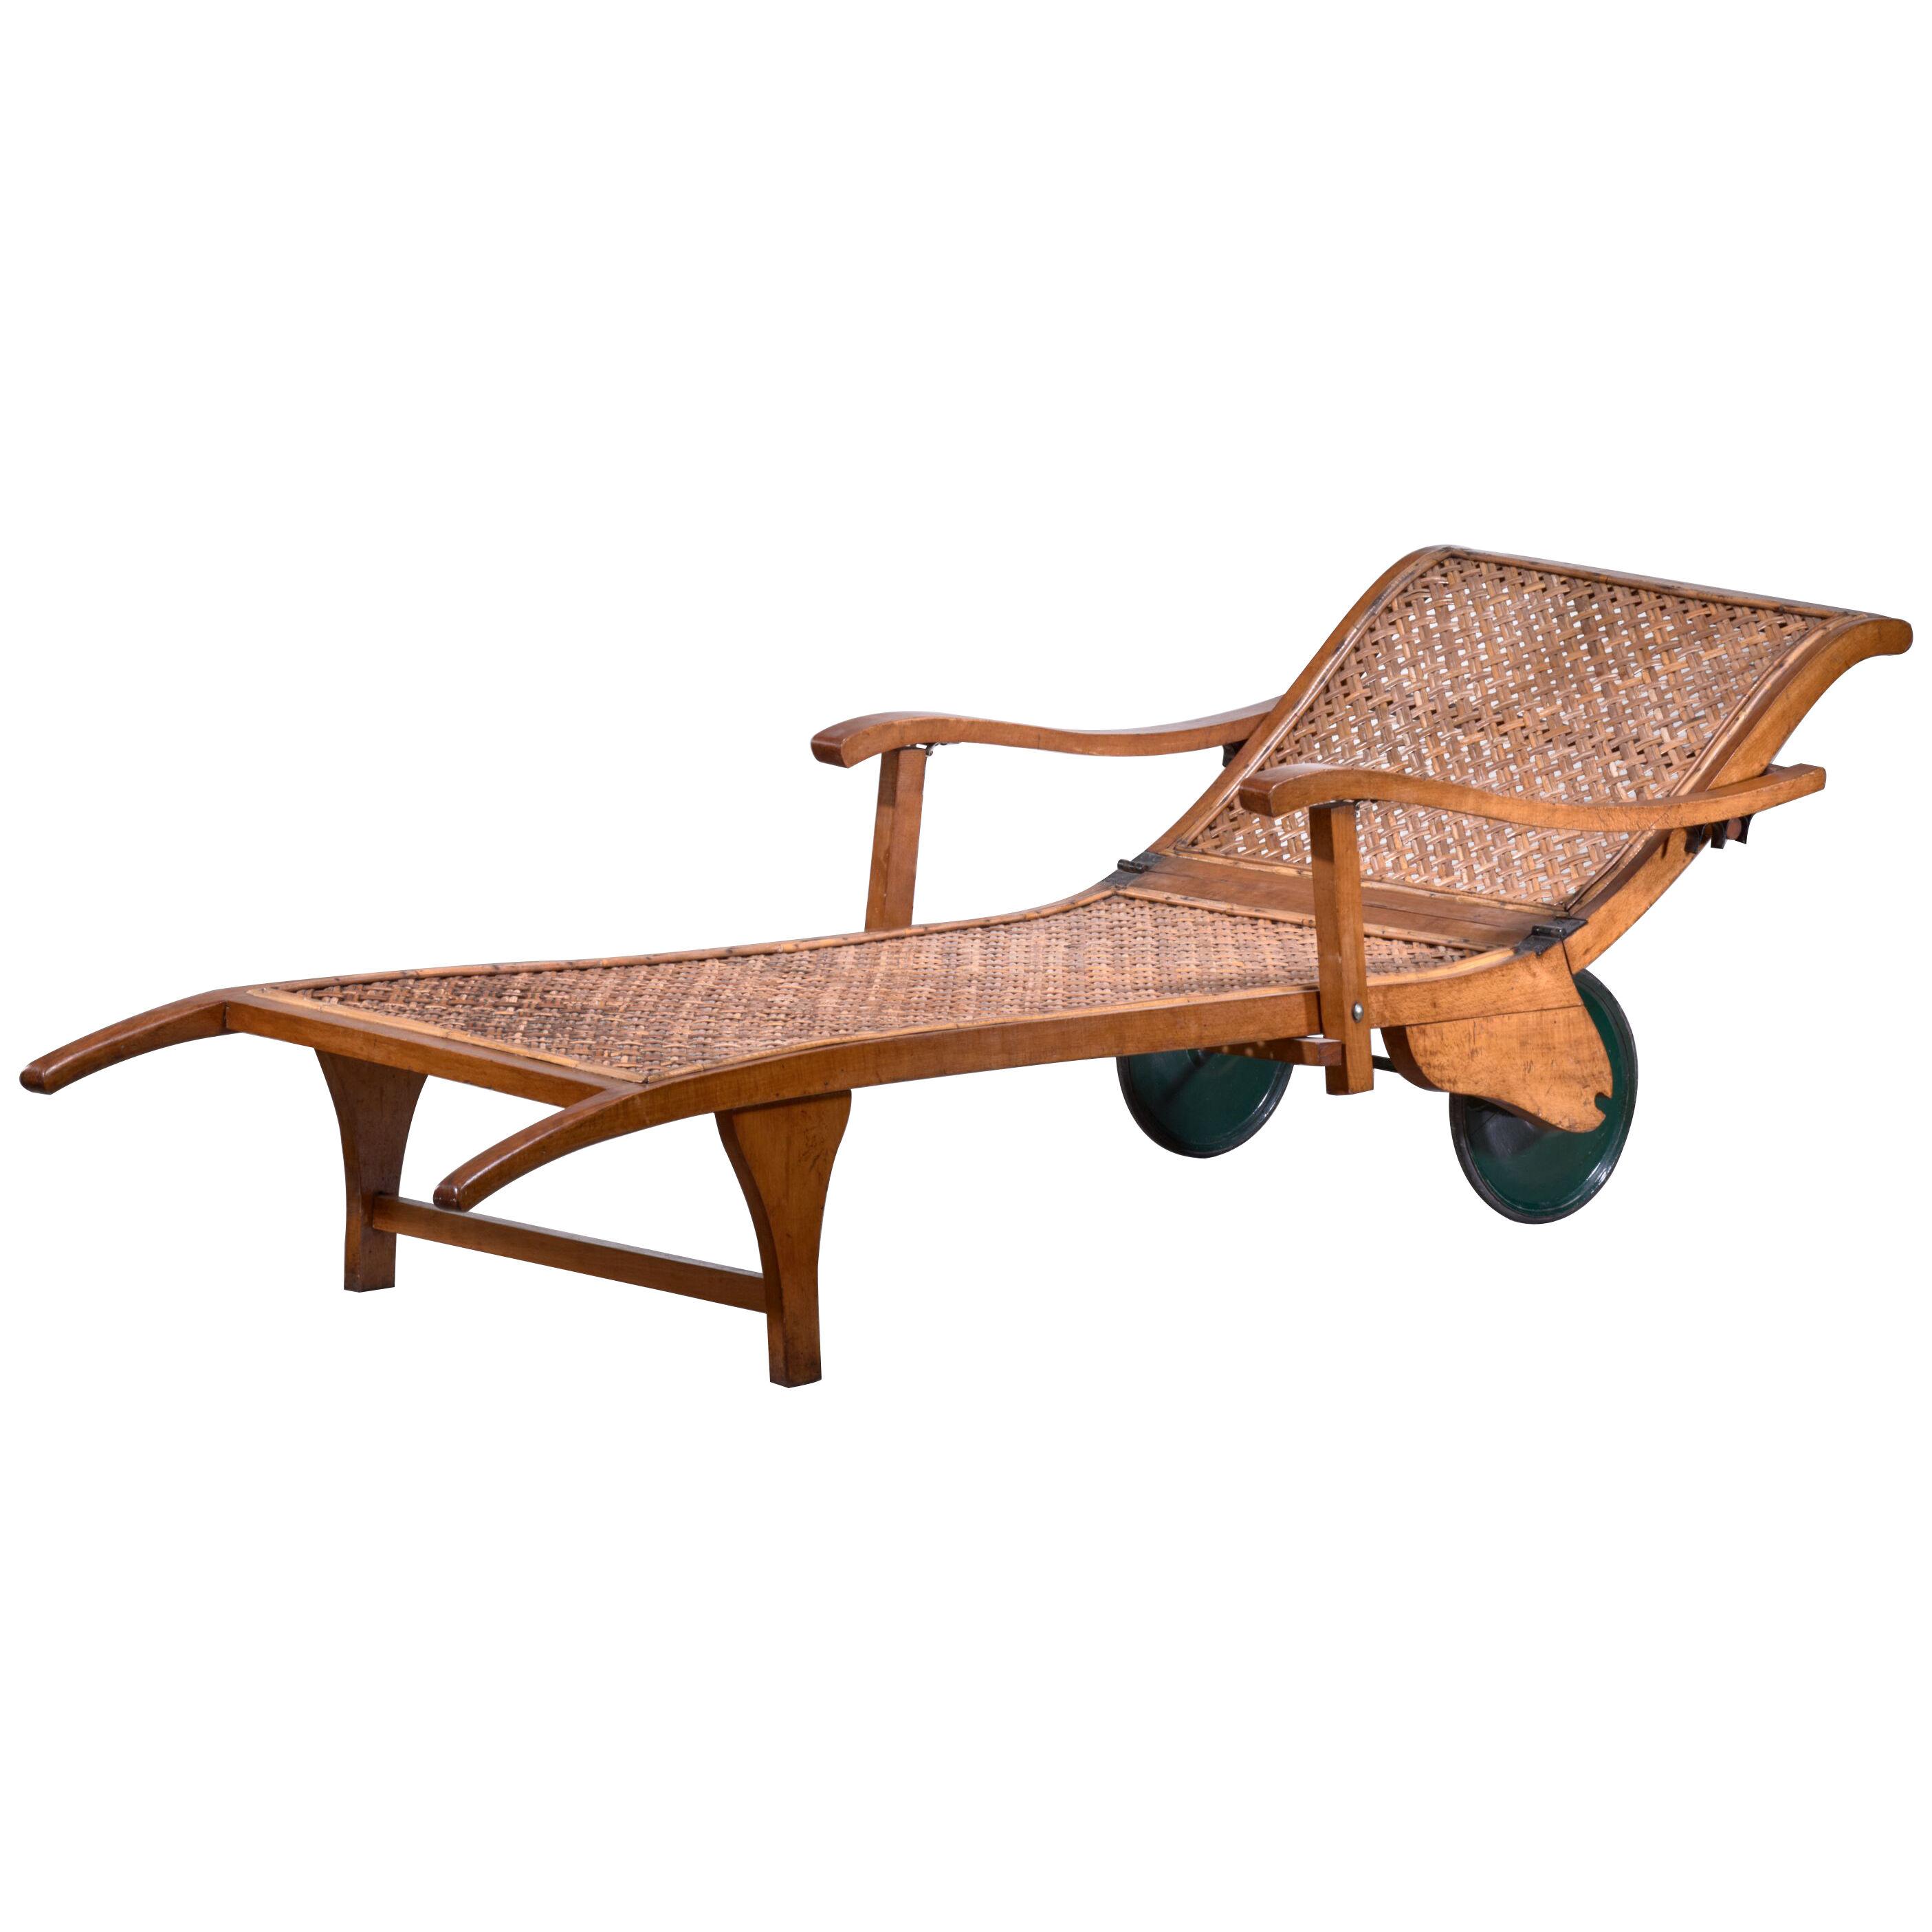 Beech and Woven Cane Garden Chaise on Wheels, Germany, 1930s